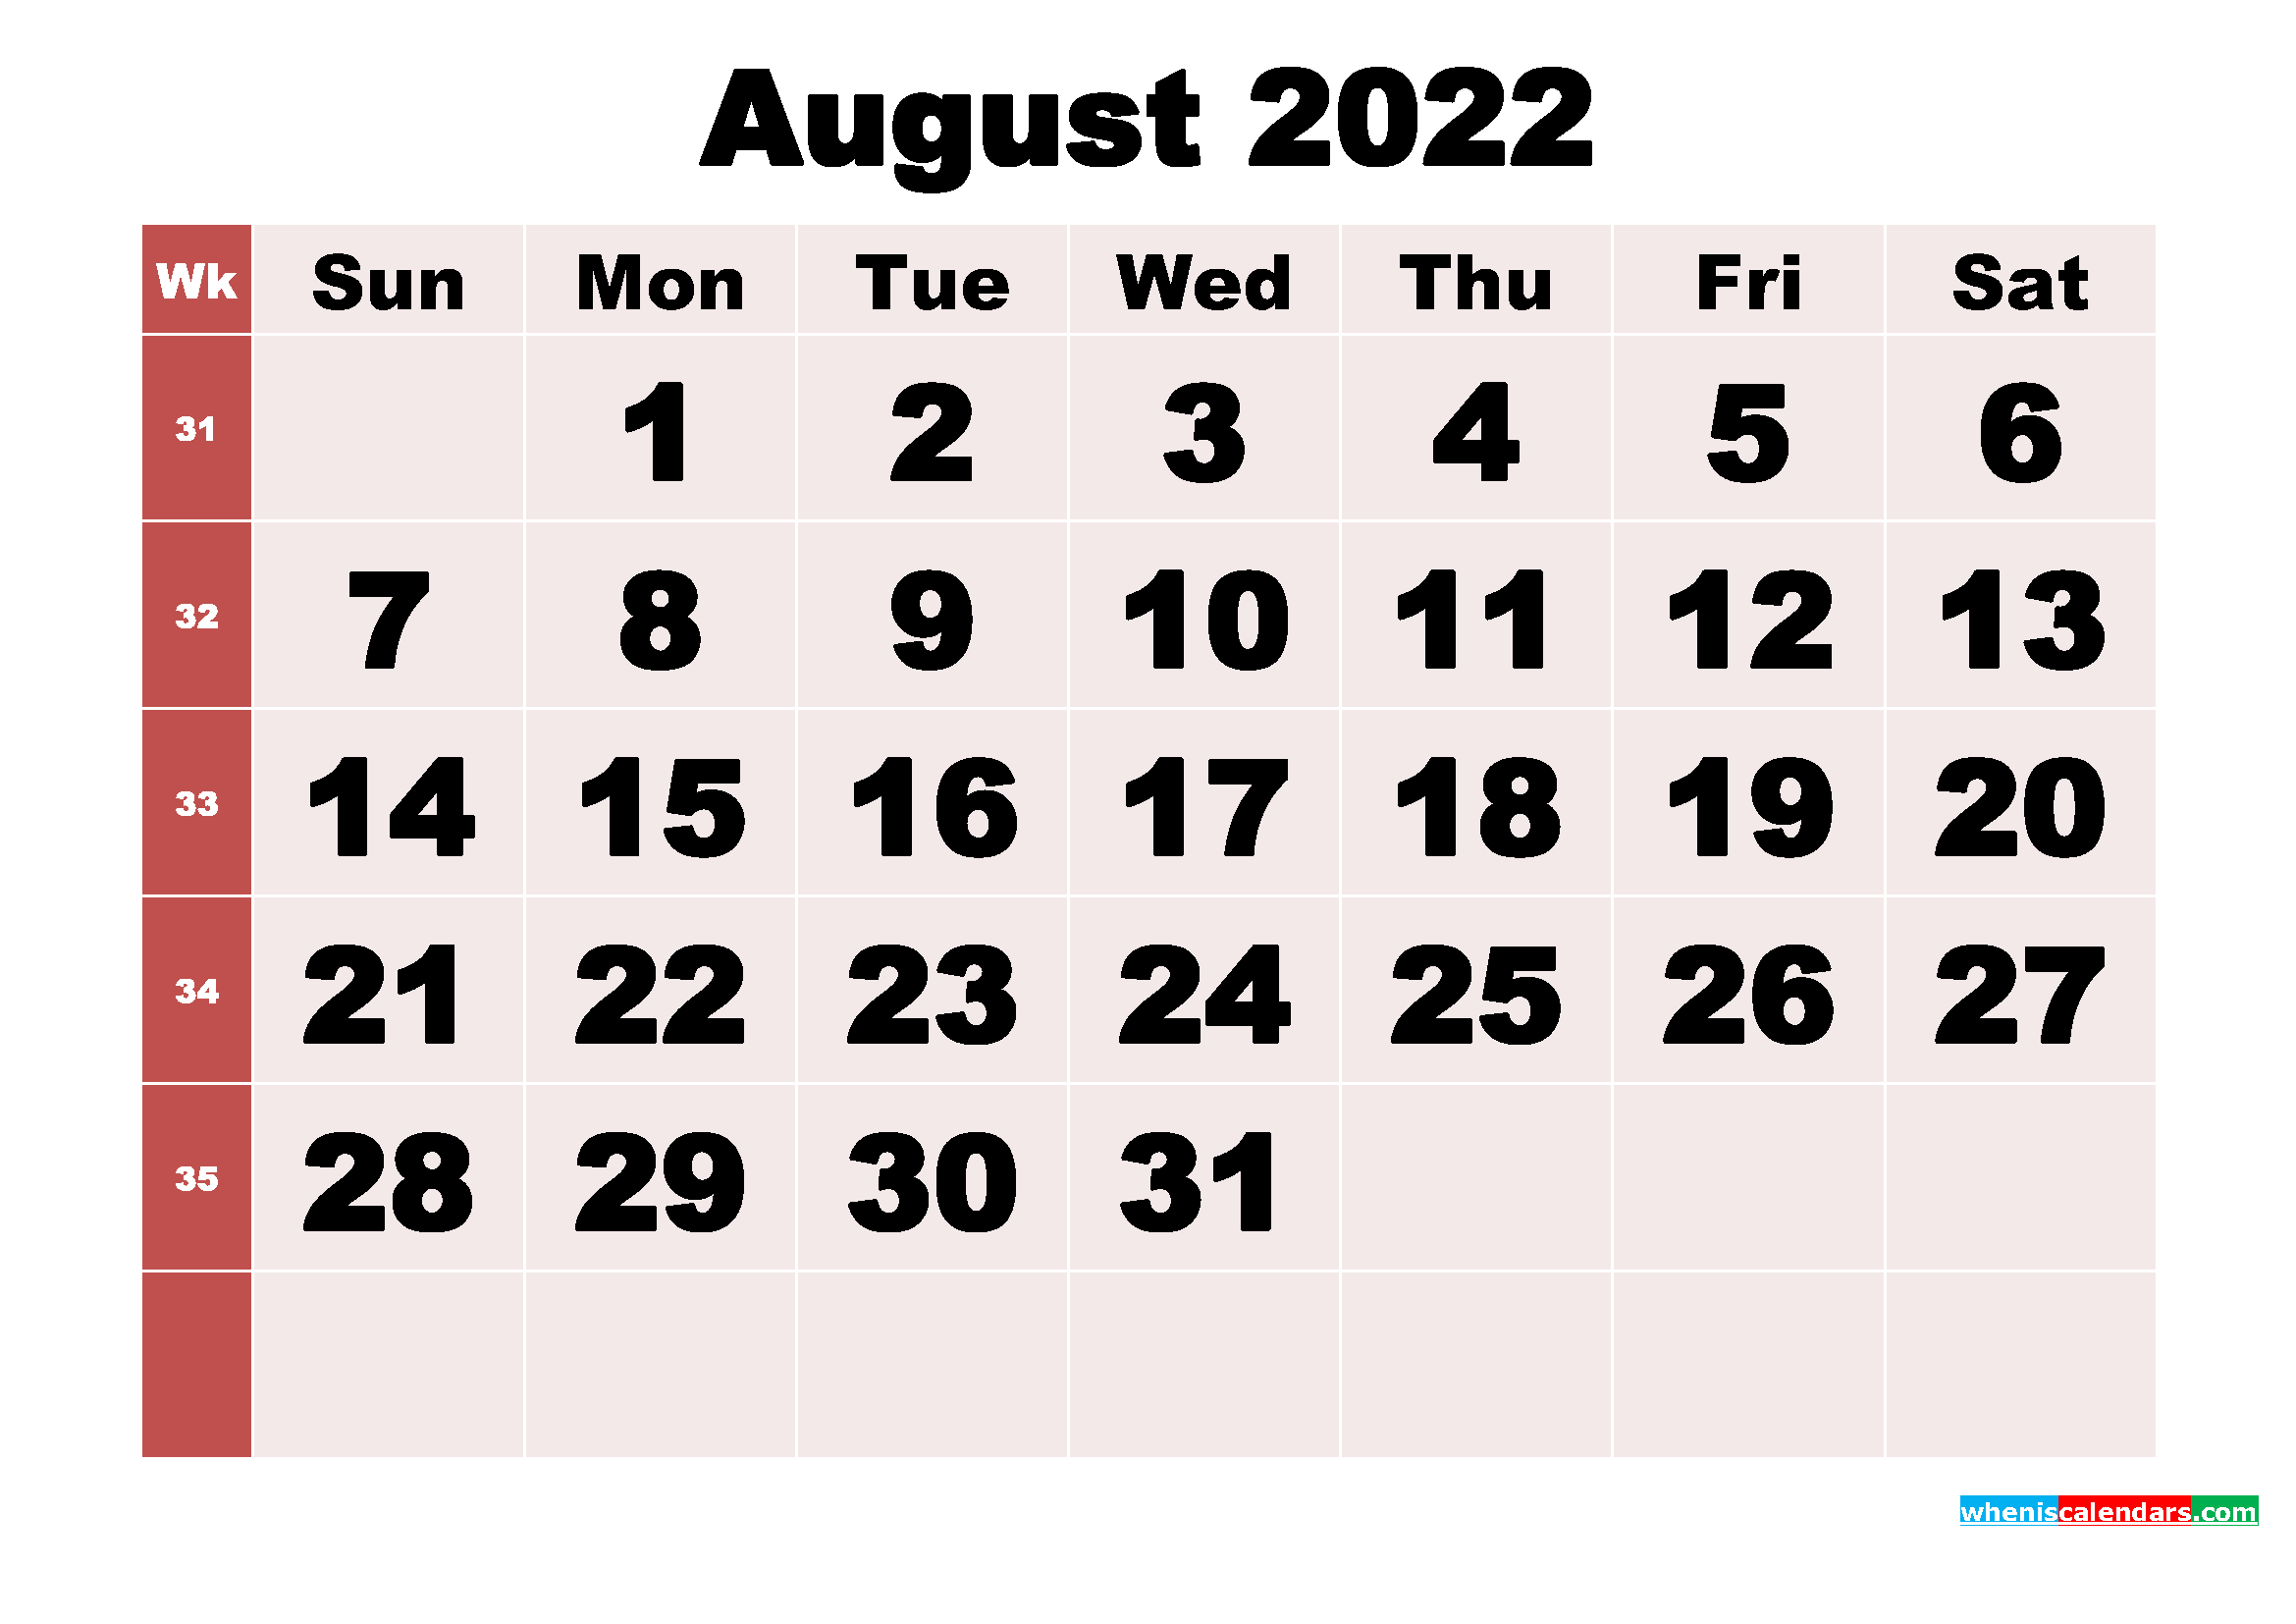 Free Printable Monthly Calendar August 2022